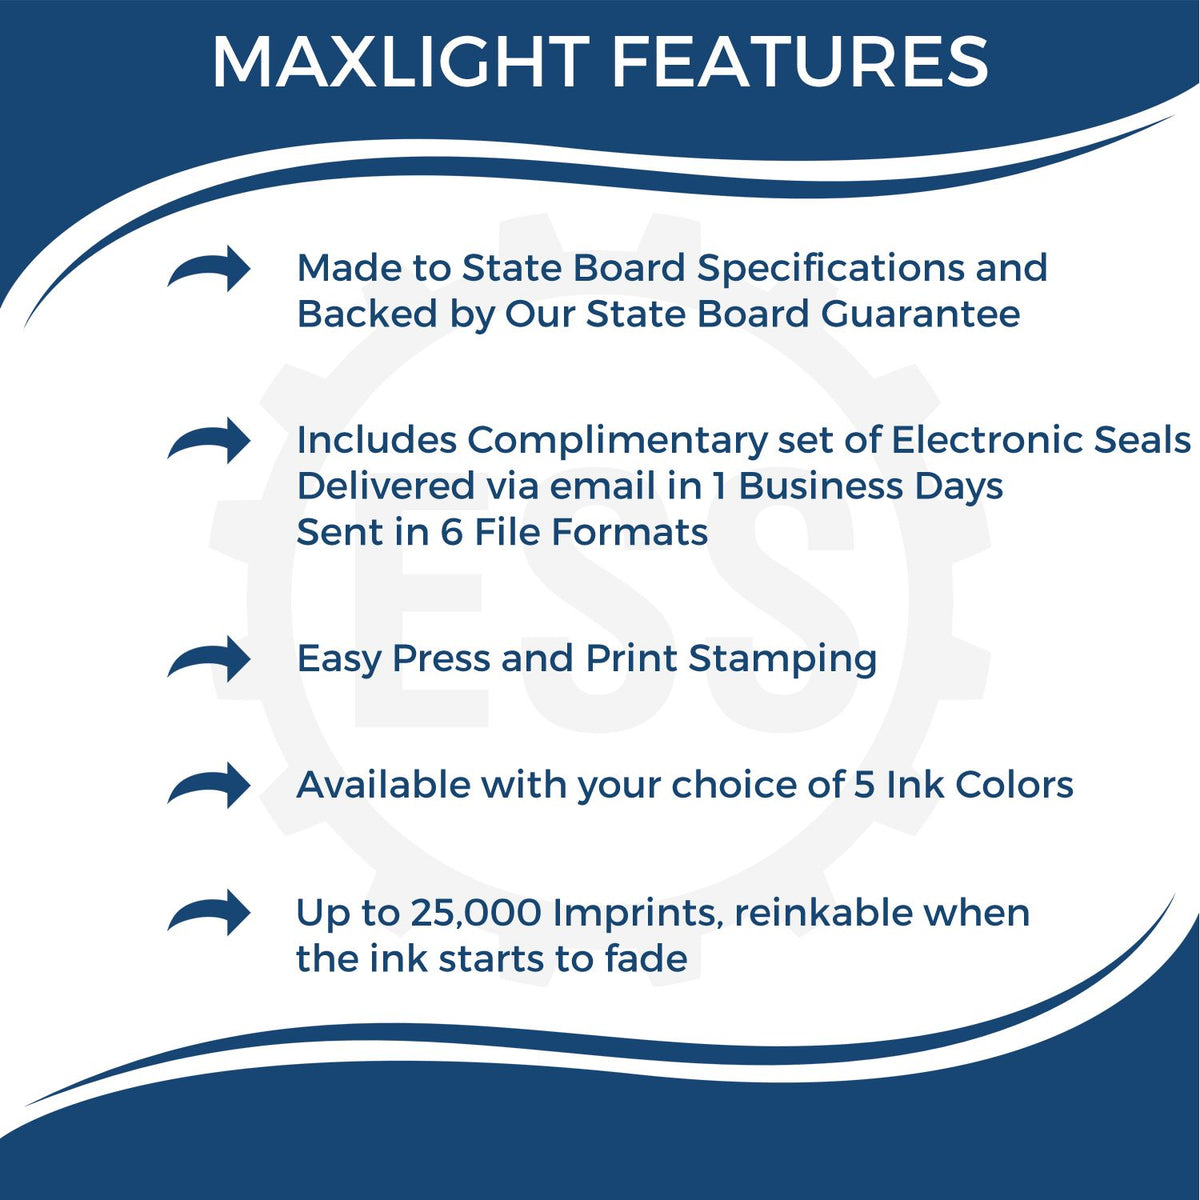 A picture of an infographic highlighting the selling points for the Premium MaxLight Pre-Inked Montana Geology Stamp